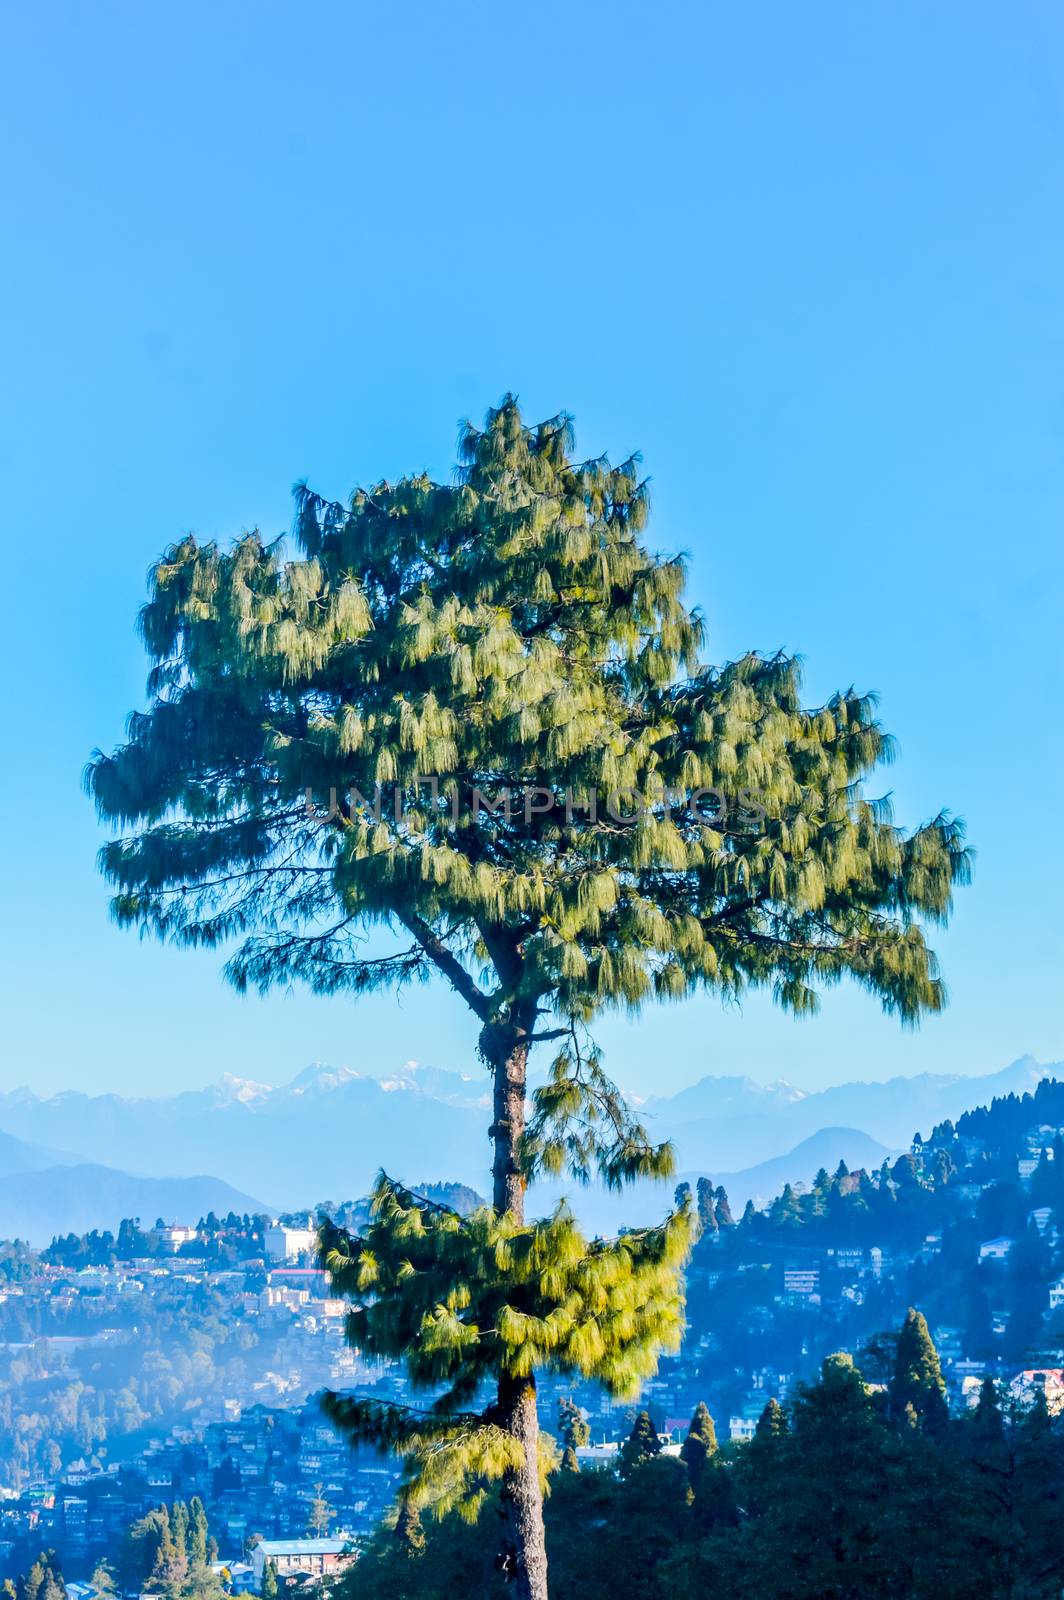 A needle pine conifer or blue pine (Pinus wallichiana) - a large Himalayan evergreen tree with a blue hue on its foliage standing alone against blue sky and distant Karakoram and Hindu Kush mountains. by sudiptabhowmick